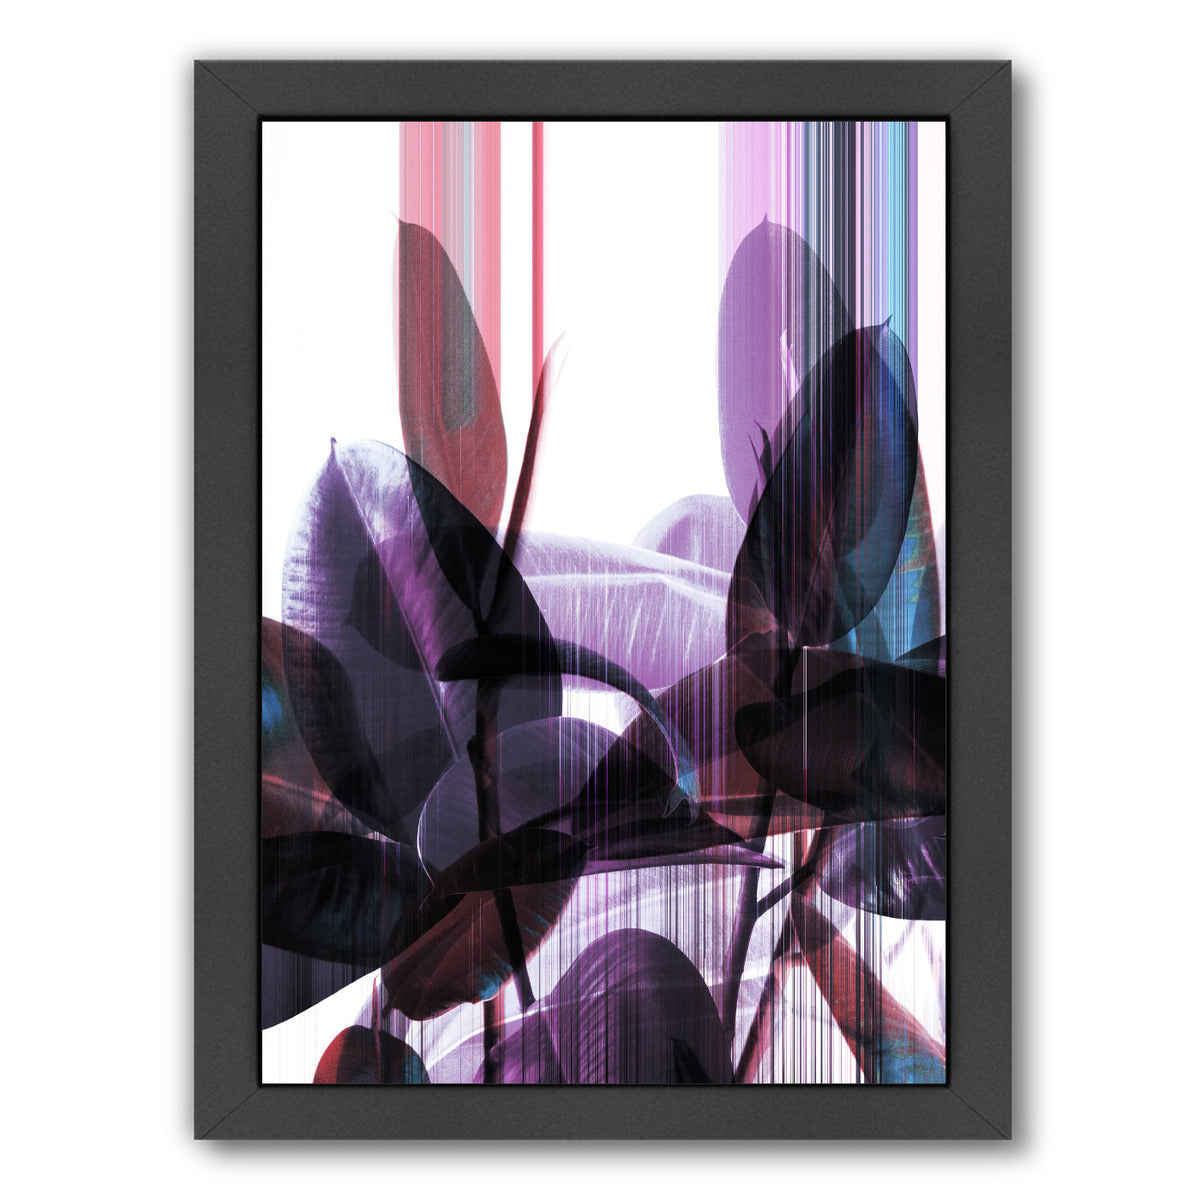 Glitches On Greenery by Emanuela Carratoni Framed Print - Americanflat